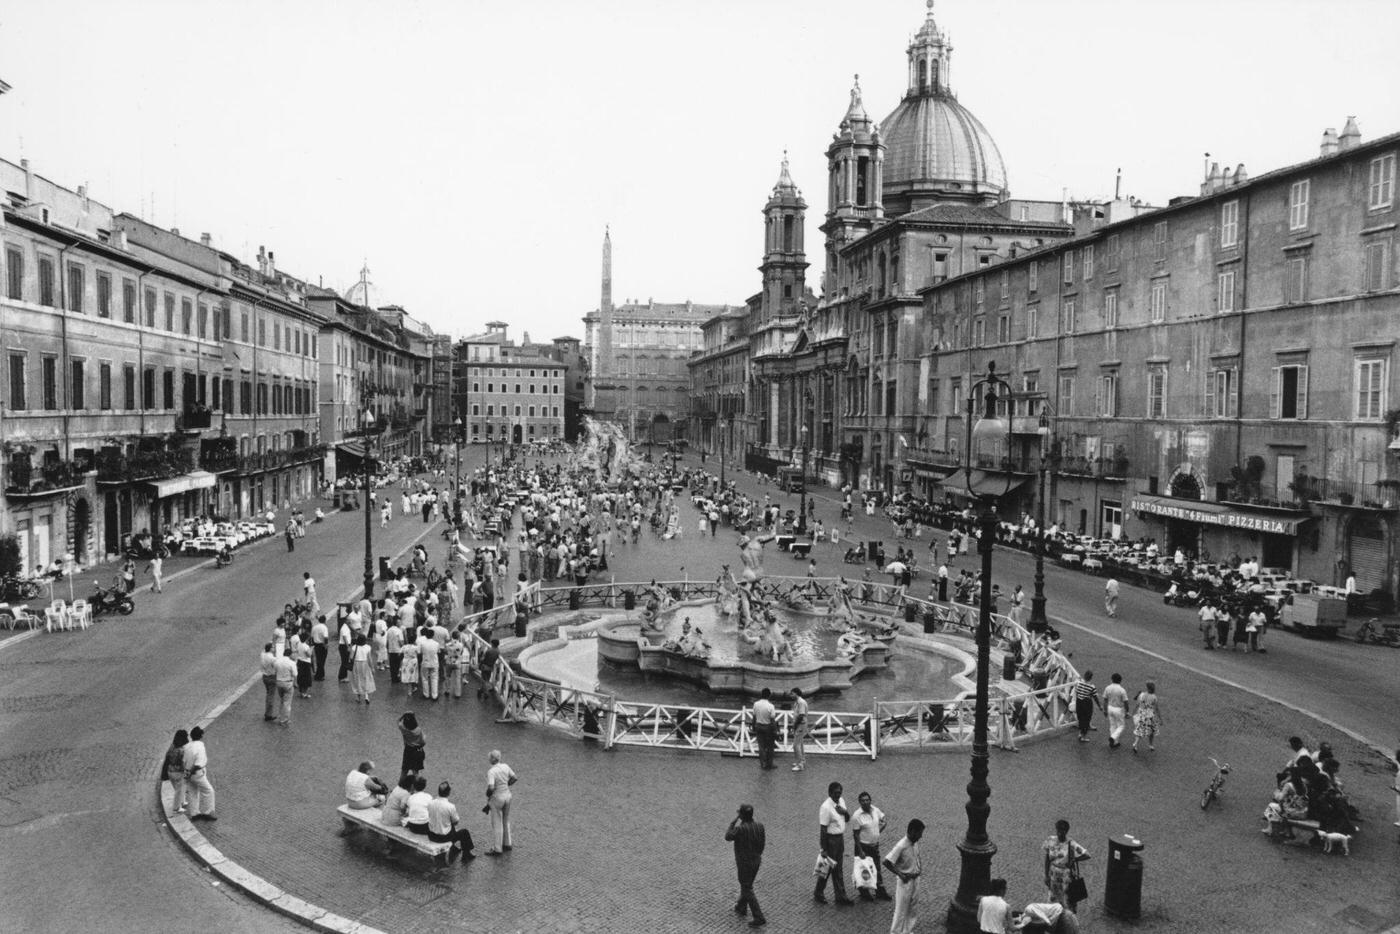 Four Rivers Fountain in Piazza Navona, Rome, 1989